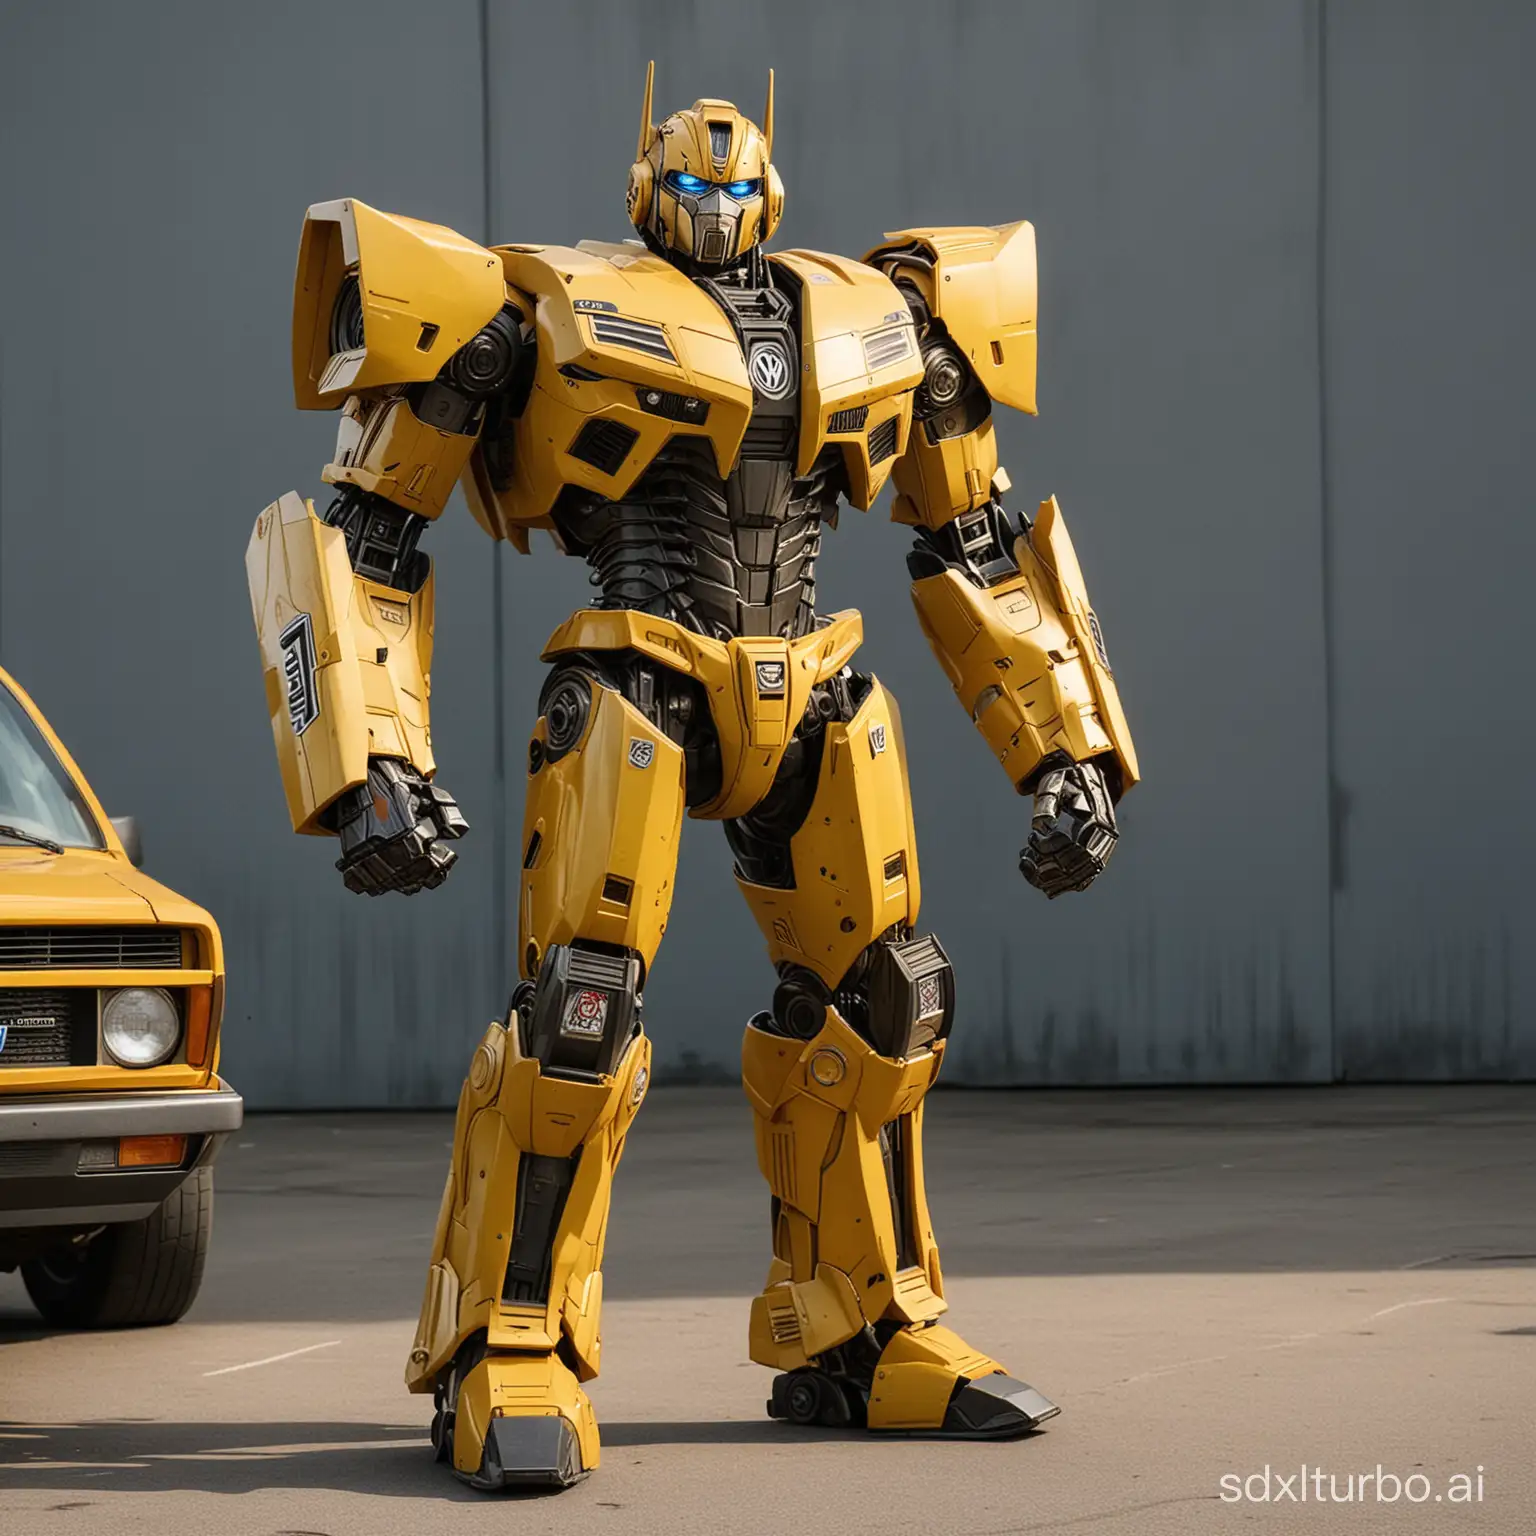 A tall Transformer, like the Autobots in the movie Transformers. He has a VW logo on his chest in front of a Volkswagen, which is very eye-catching, and a dark yellow paint color